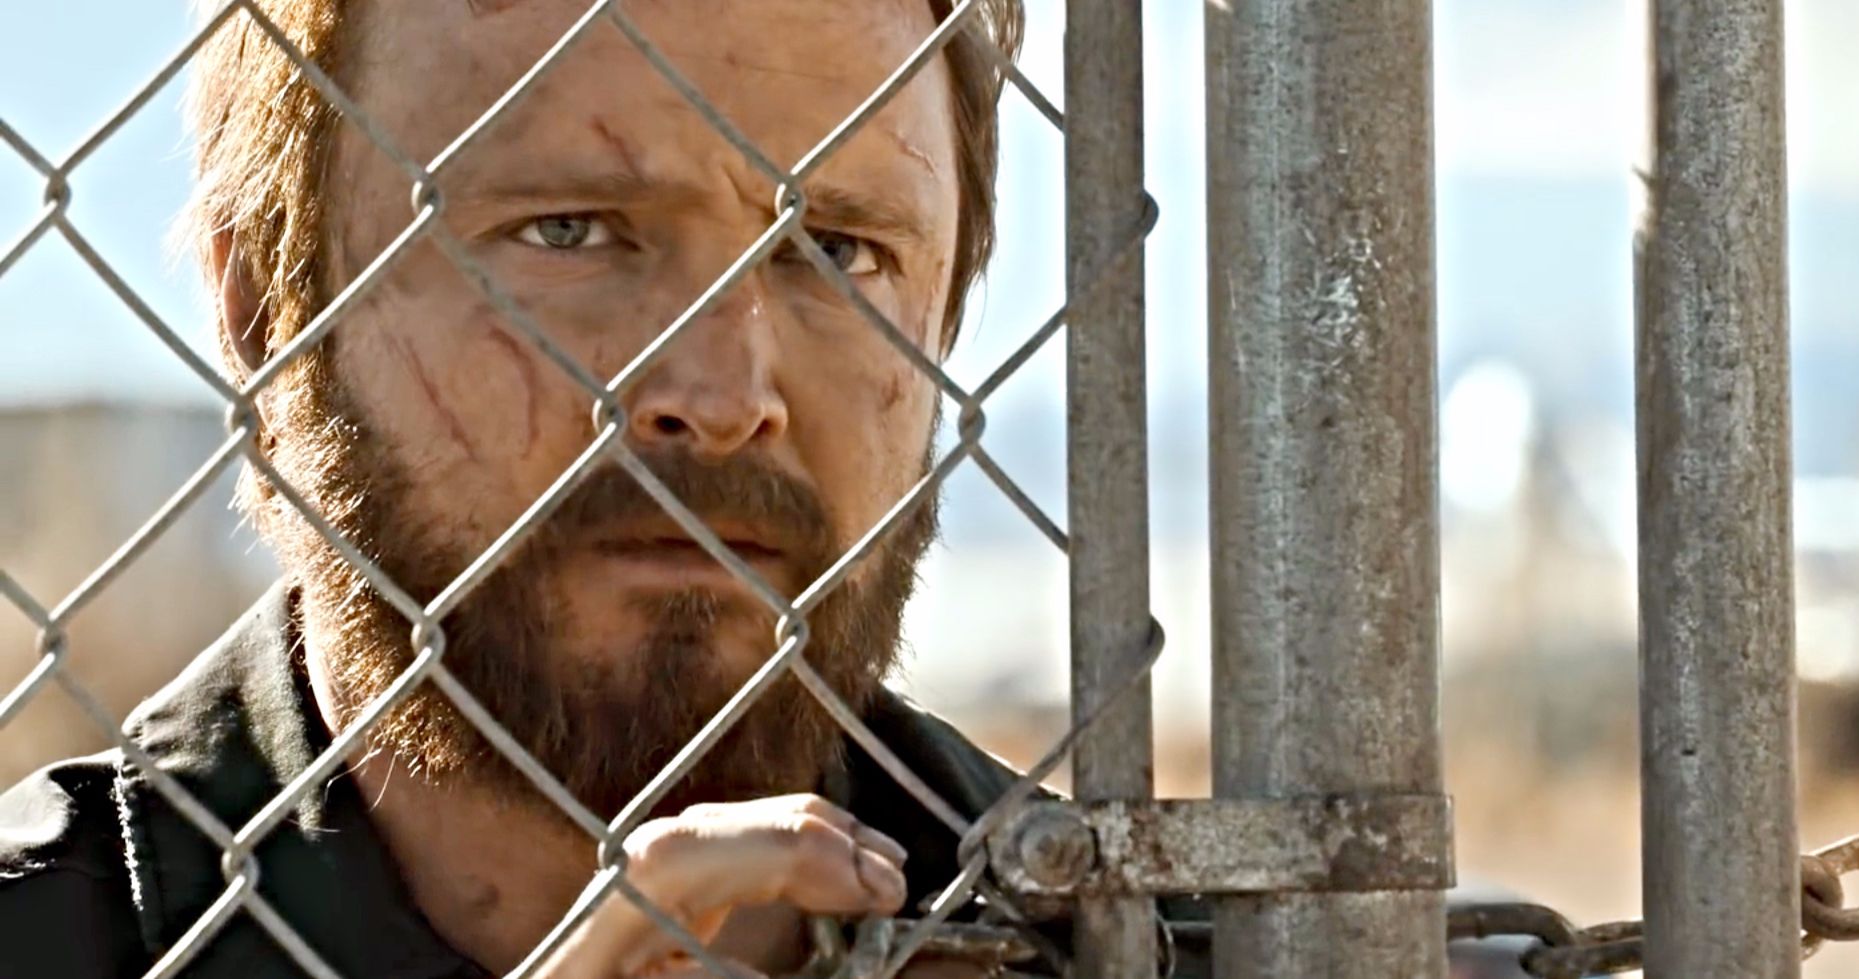 Go Behind the Breaking Bad Reunion in Road to El Camino Featurette